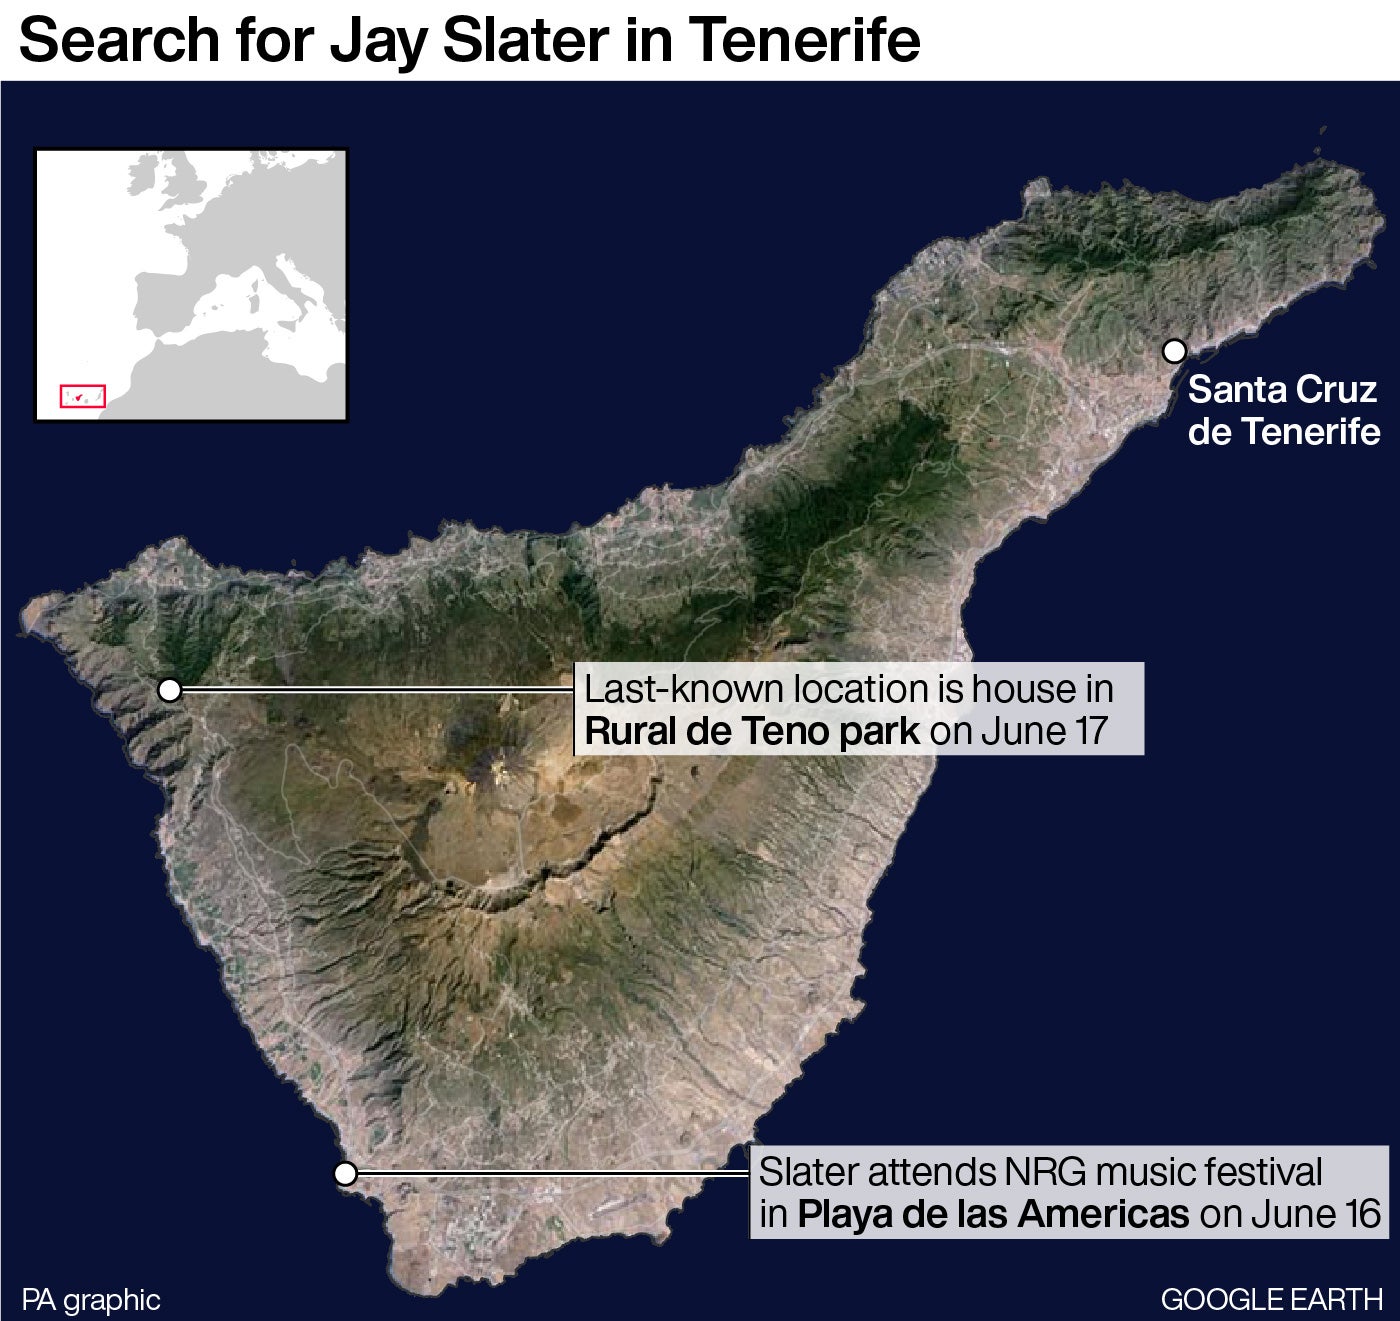 tenerife, spanish, teenager, police, massive appeal sees volunteers help search for jay slater as two men ruled out of investigation